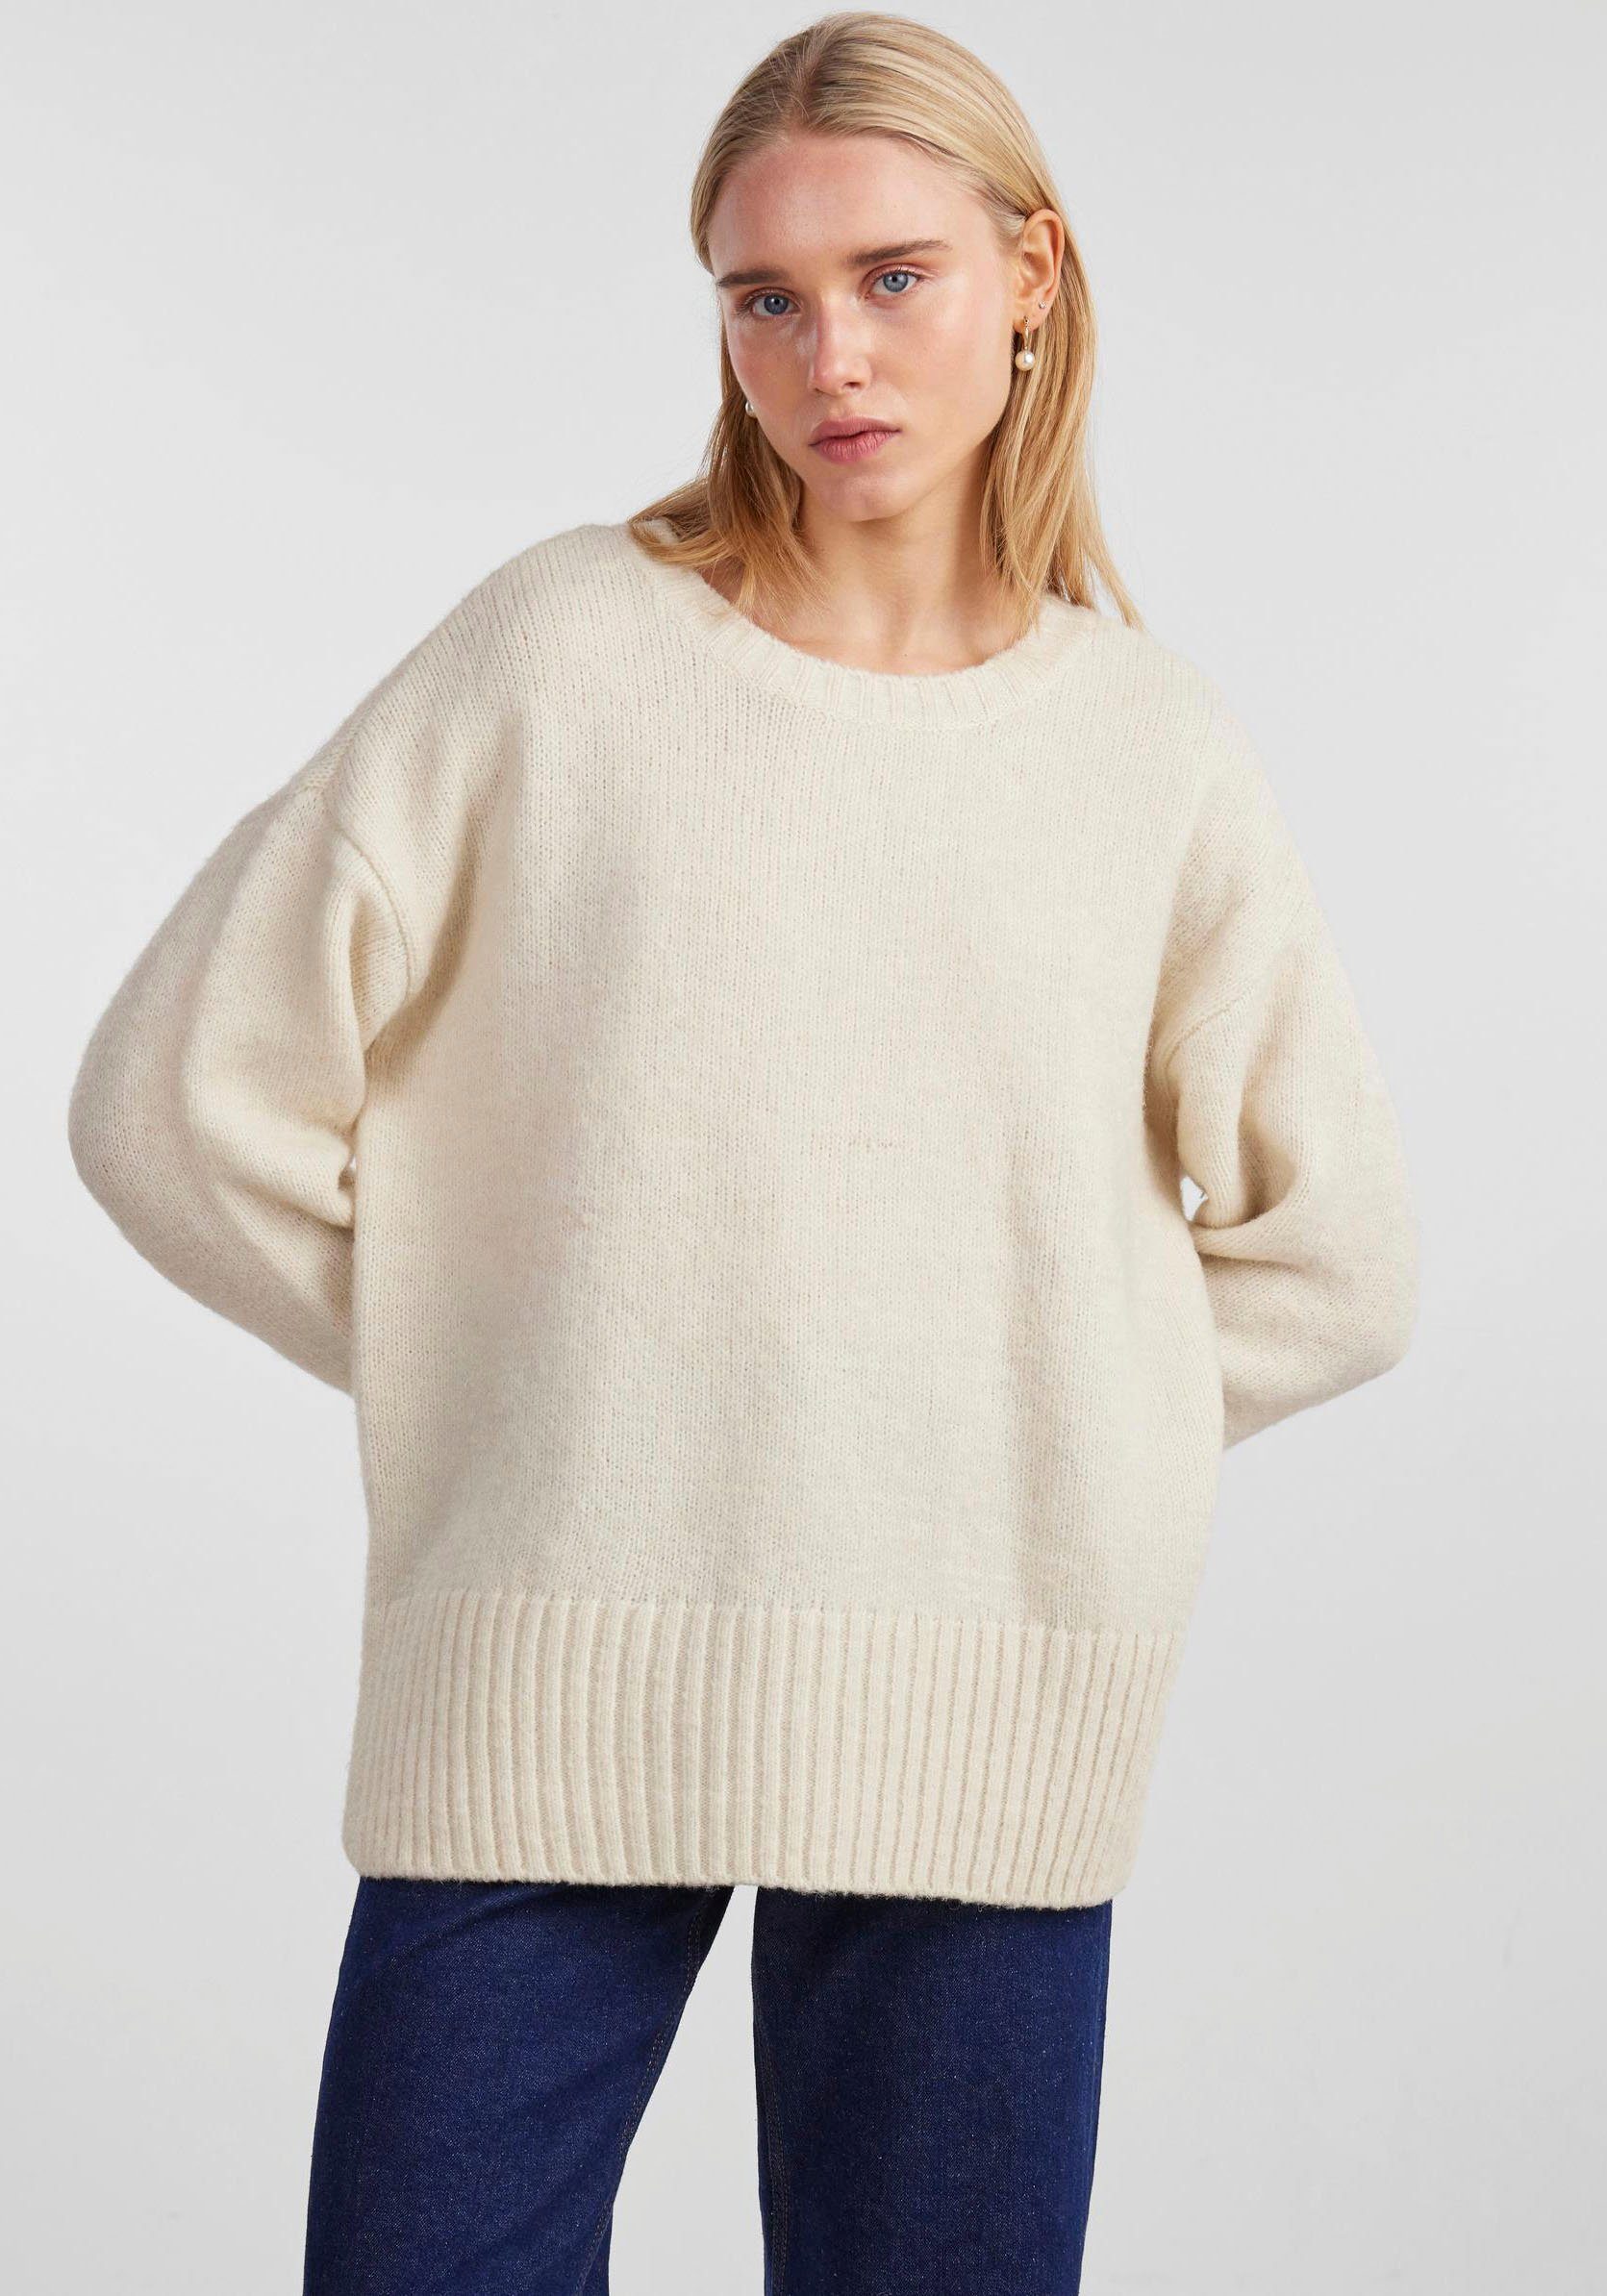 Oversized BC LOOSE KNIT Strickpullover NOOS PCNANCY pieces Birch O-NECK LS